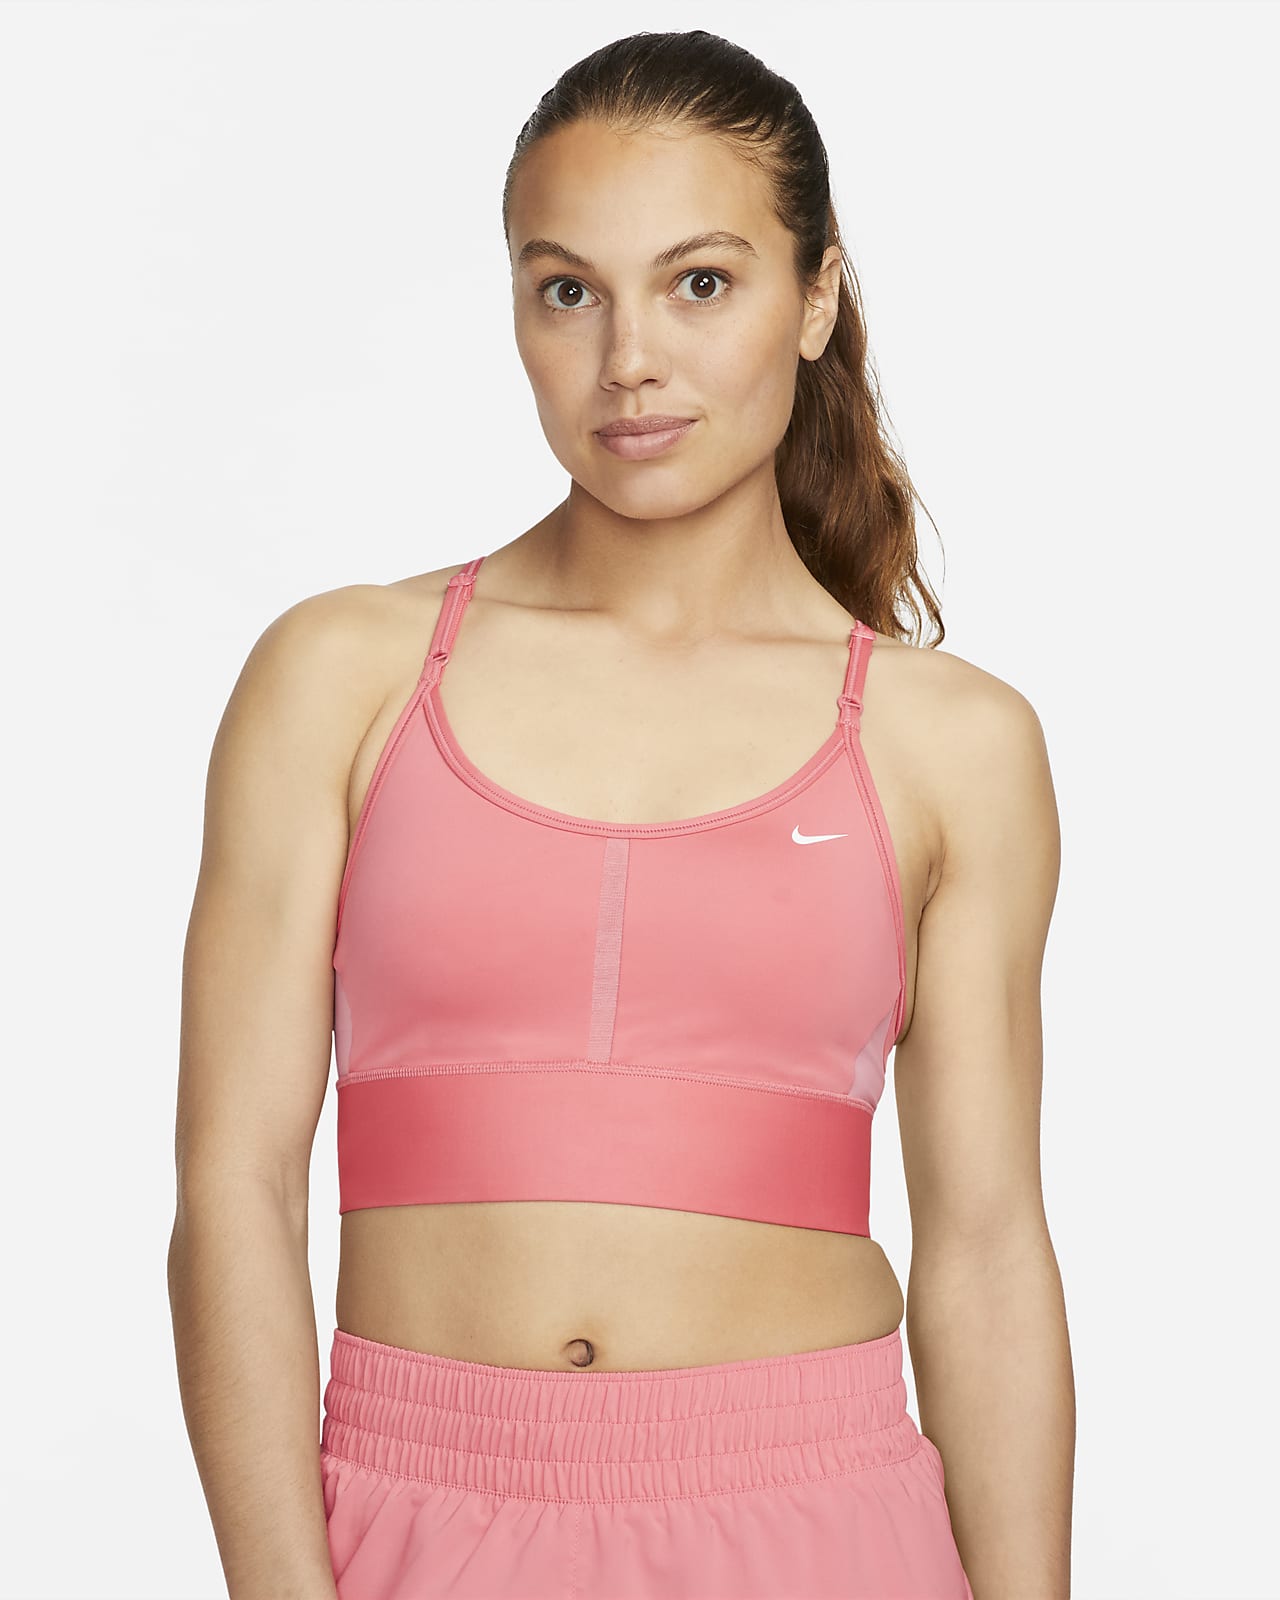 NIKE AIR DRI-FIT Indy Women's Light-Support Padded Strappy Sports Bra  £19.99 - PicClick UK